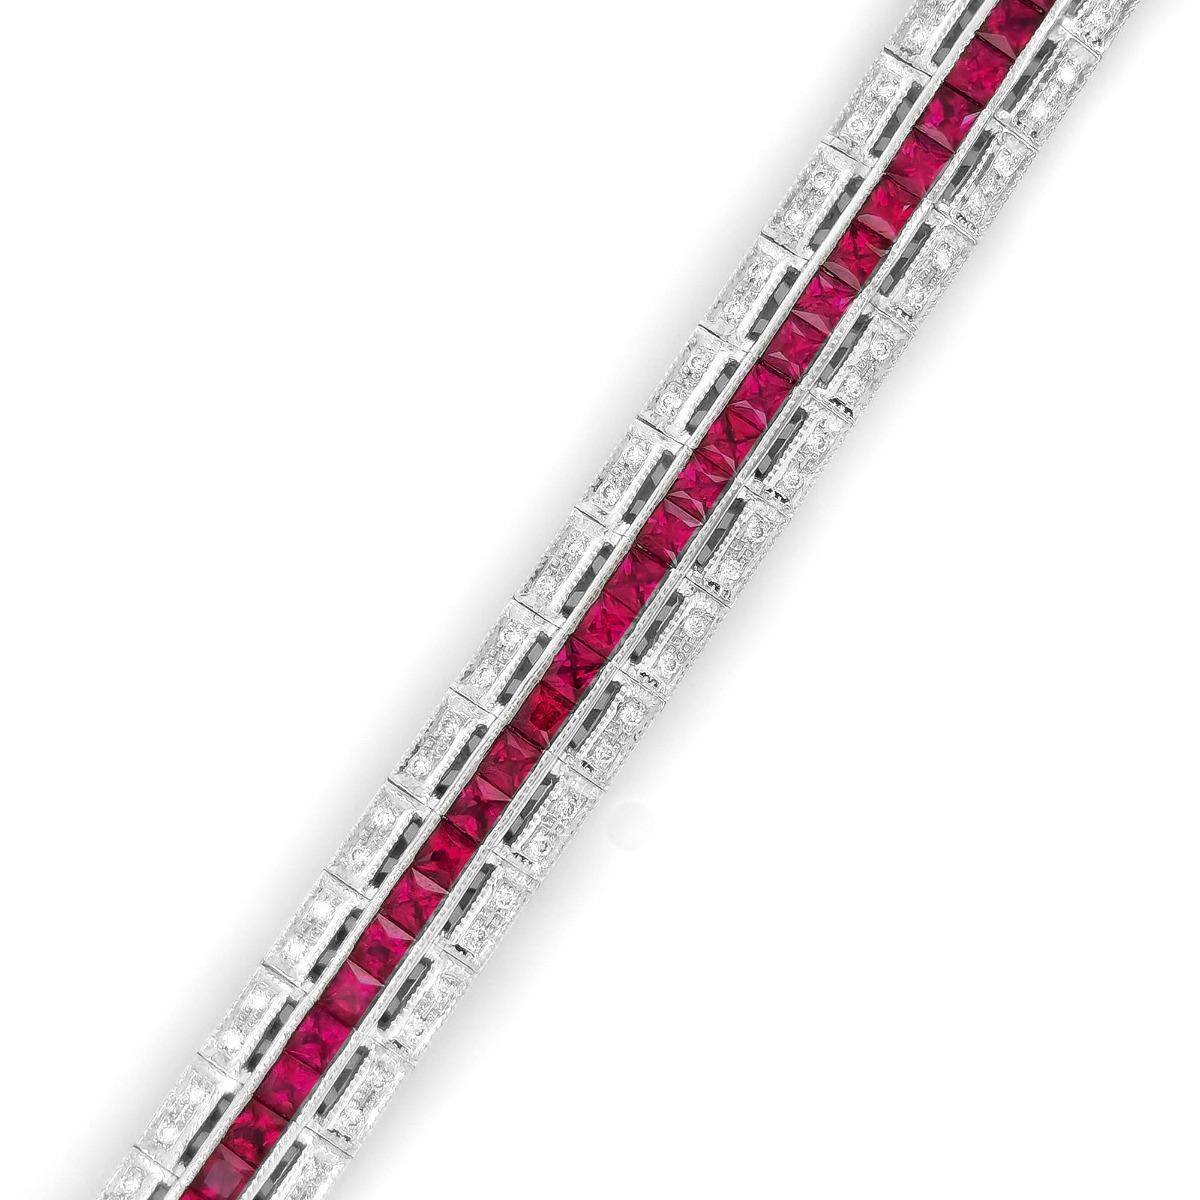 Romantic Natural Rubies 5.04 Carats in 14K White Gold Bracelet with Diamonds